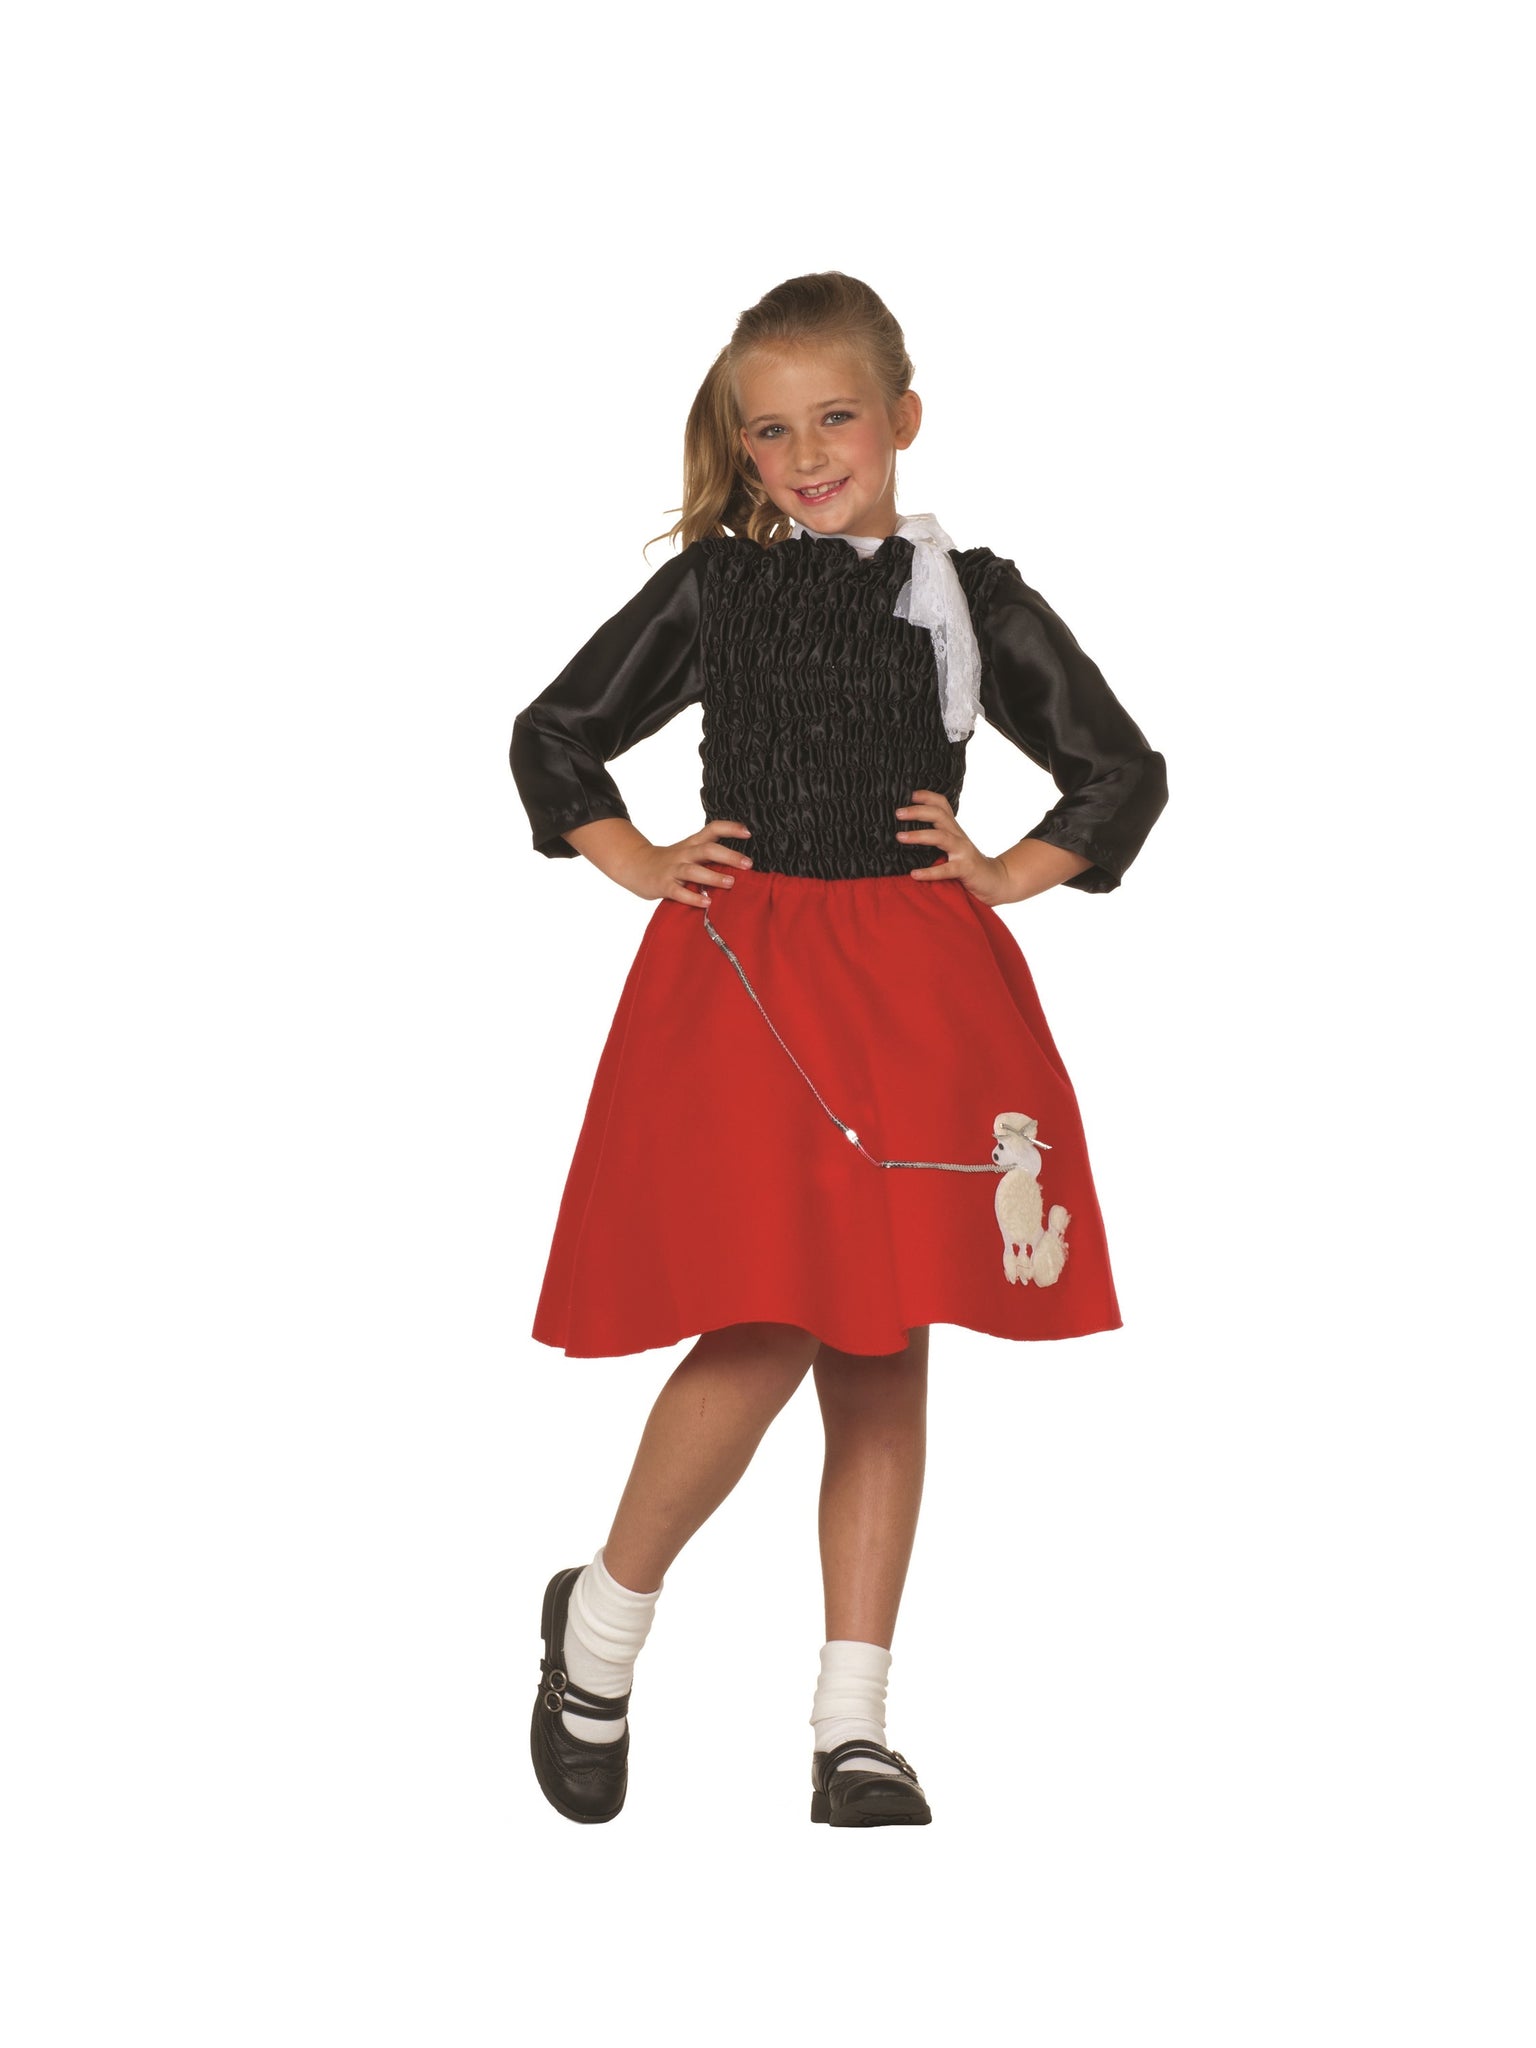 C. Poodle Skirt Red SM